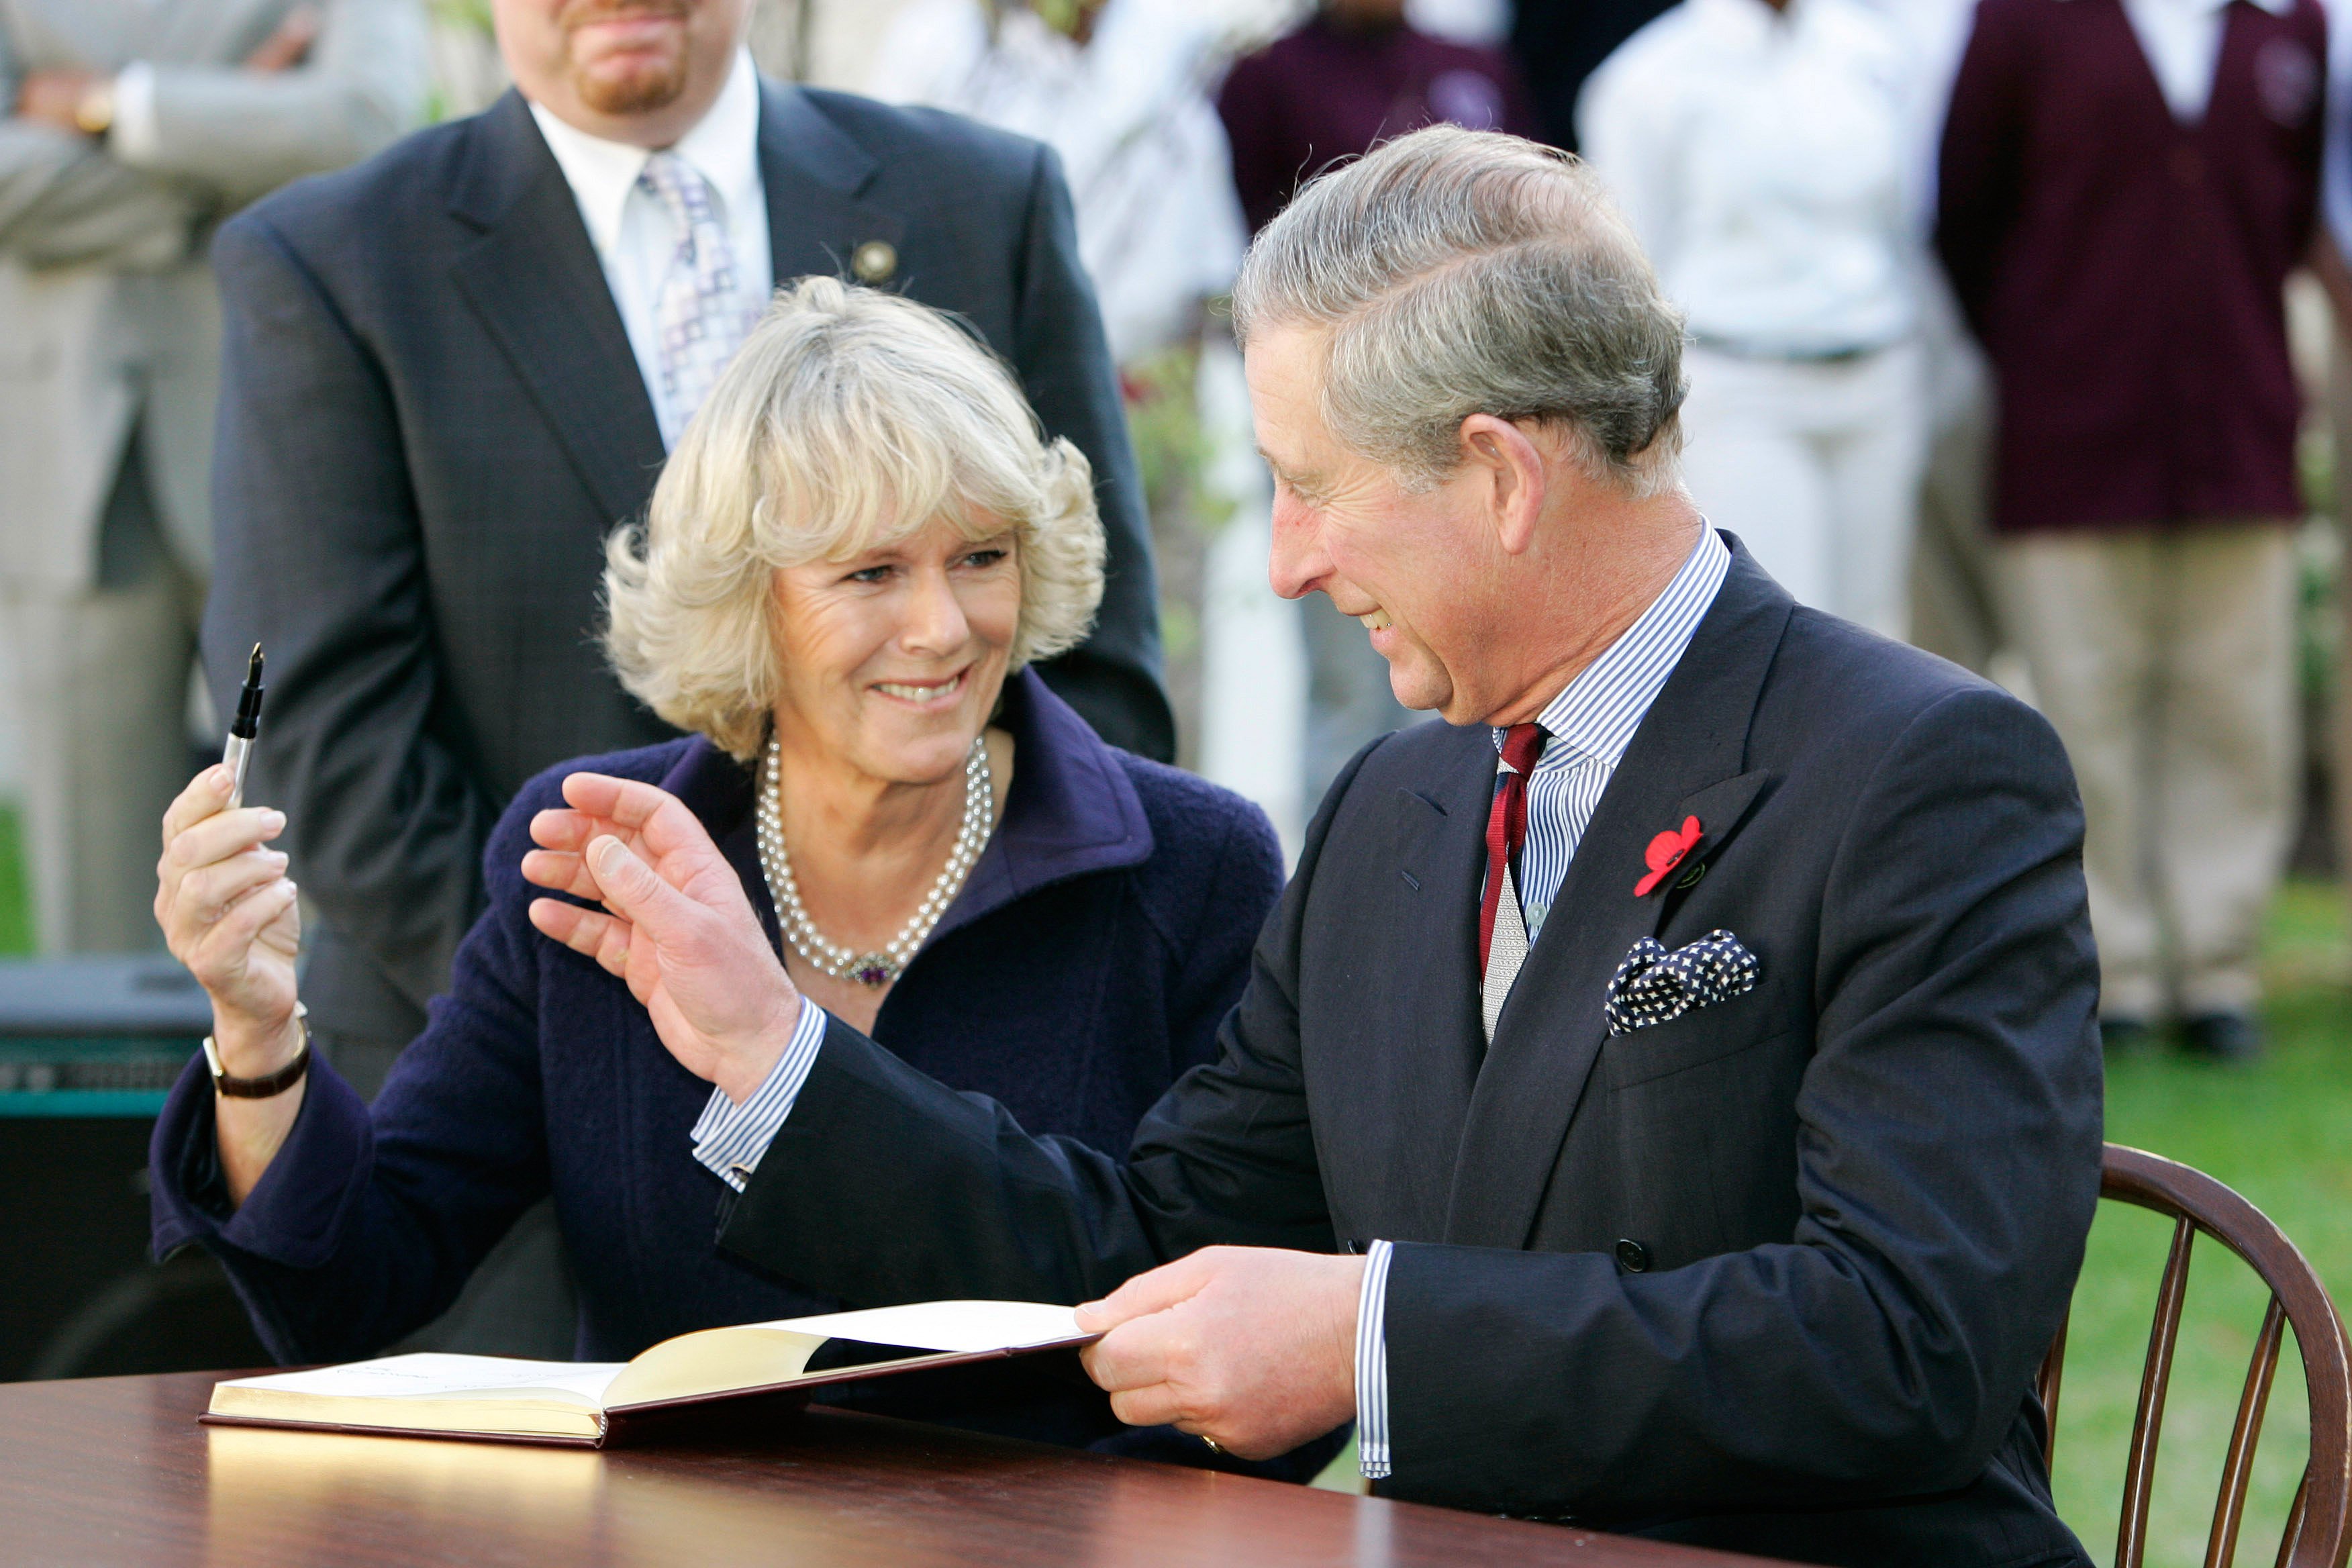 Camilla Parker Bowles and King Charles III giggle and joke with each other while signing the visitors' book at SEED School